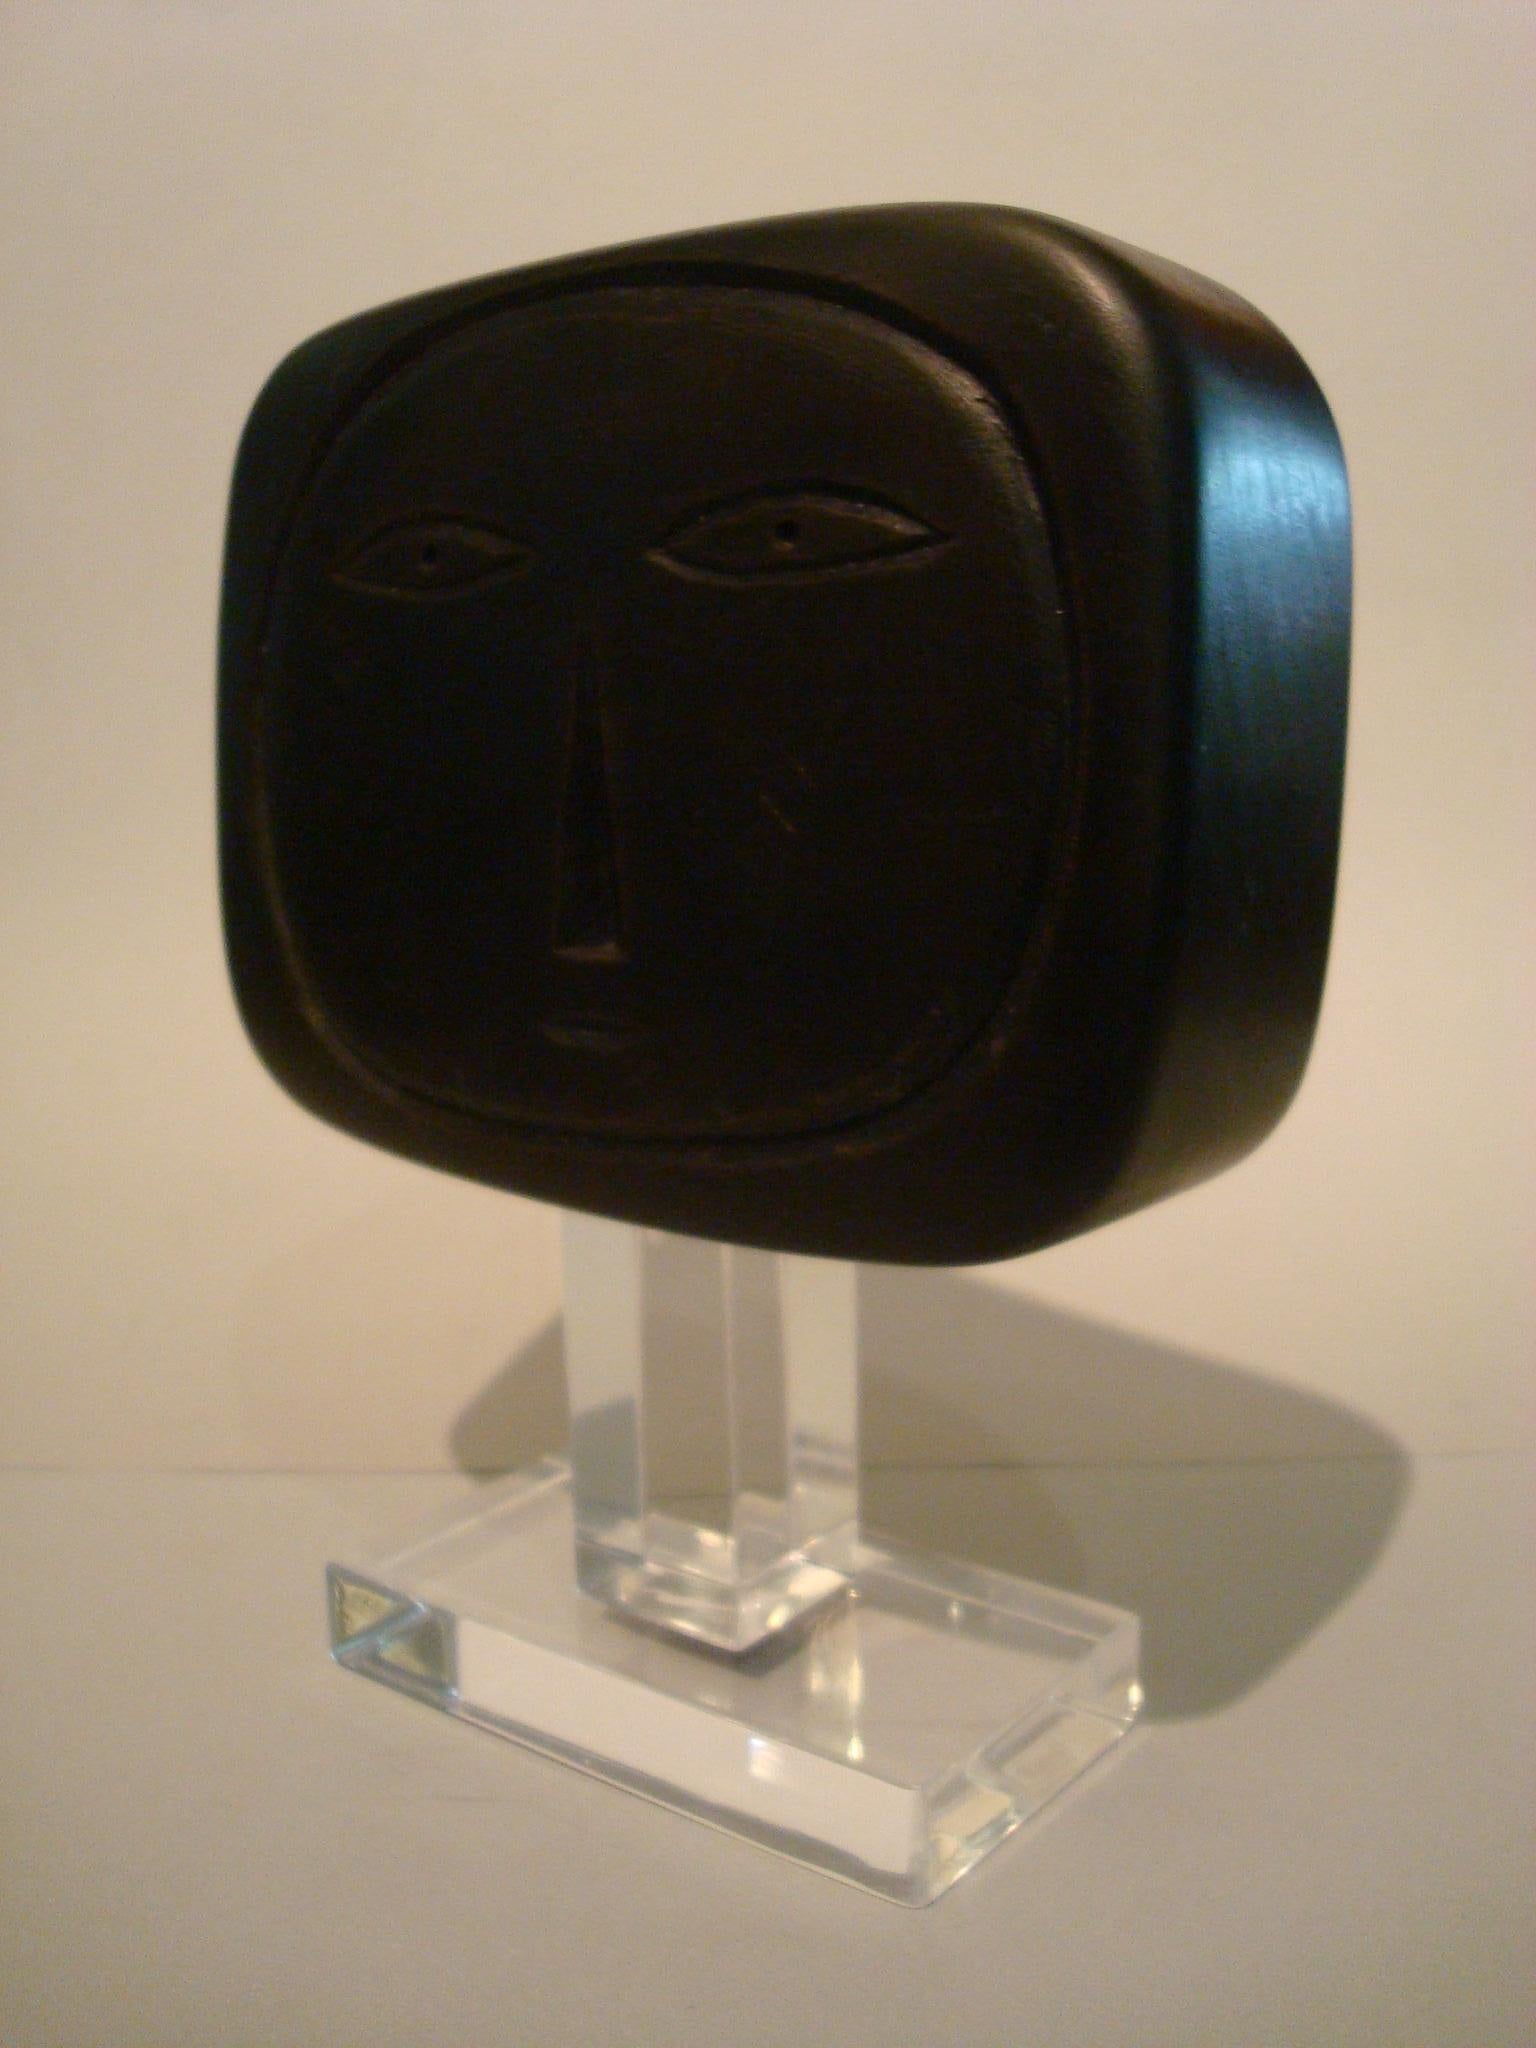 Mid-20th Century Painted Wood Face Sculpture 1950s Signed L.N For Sale 2